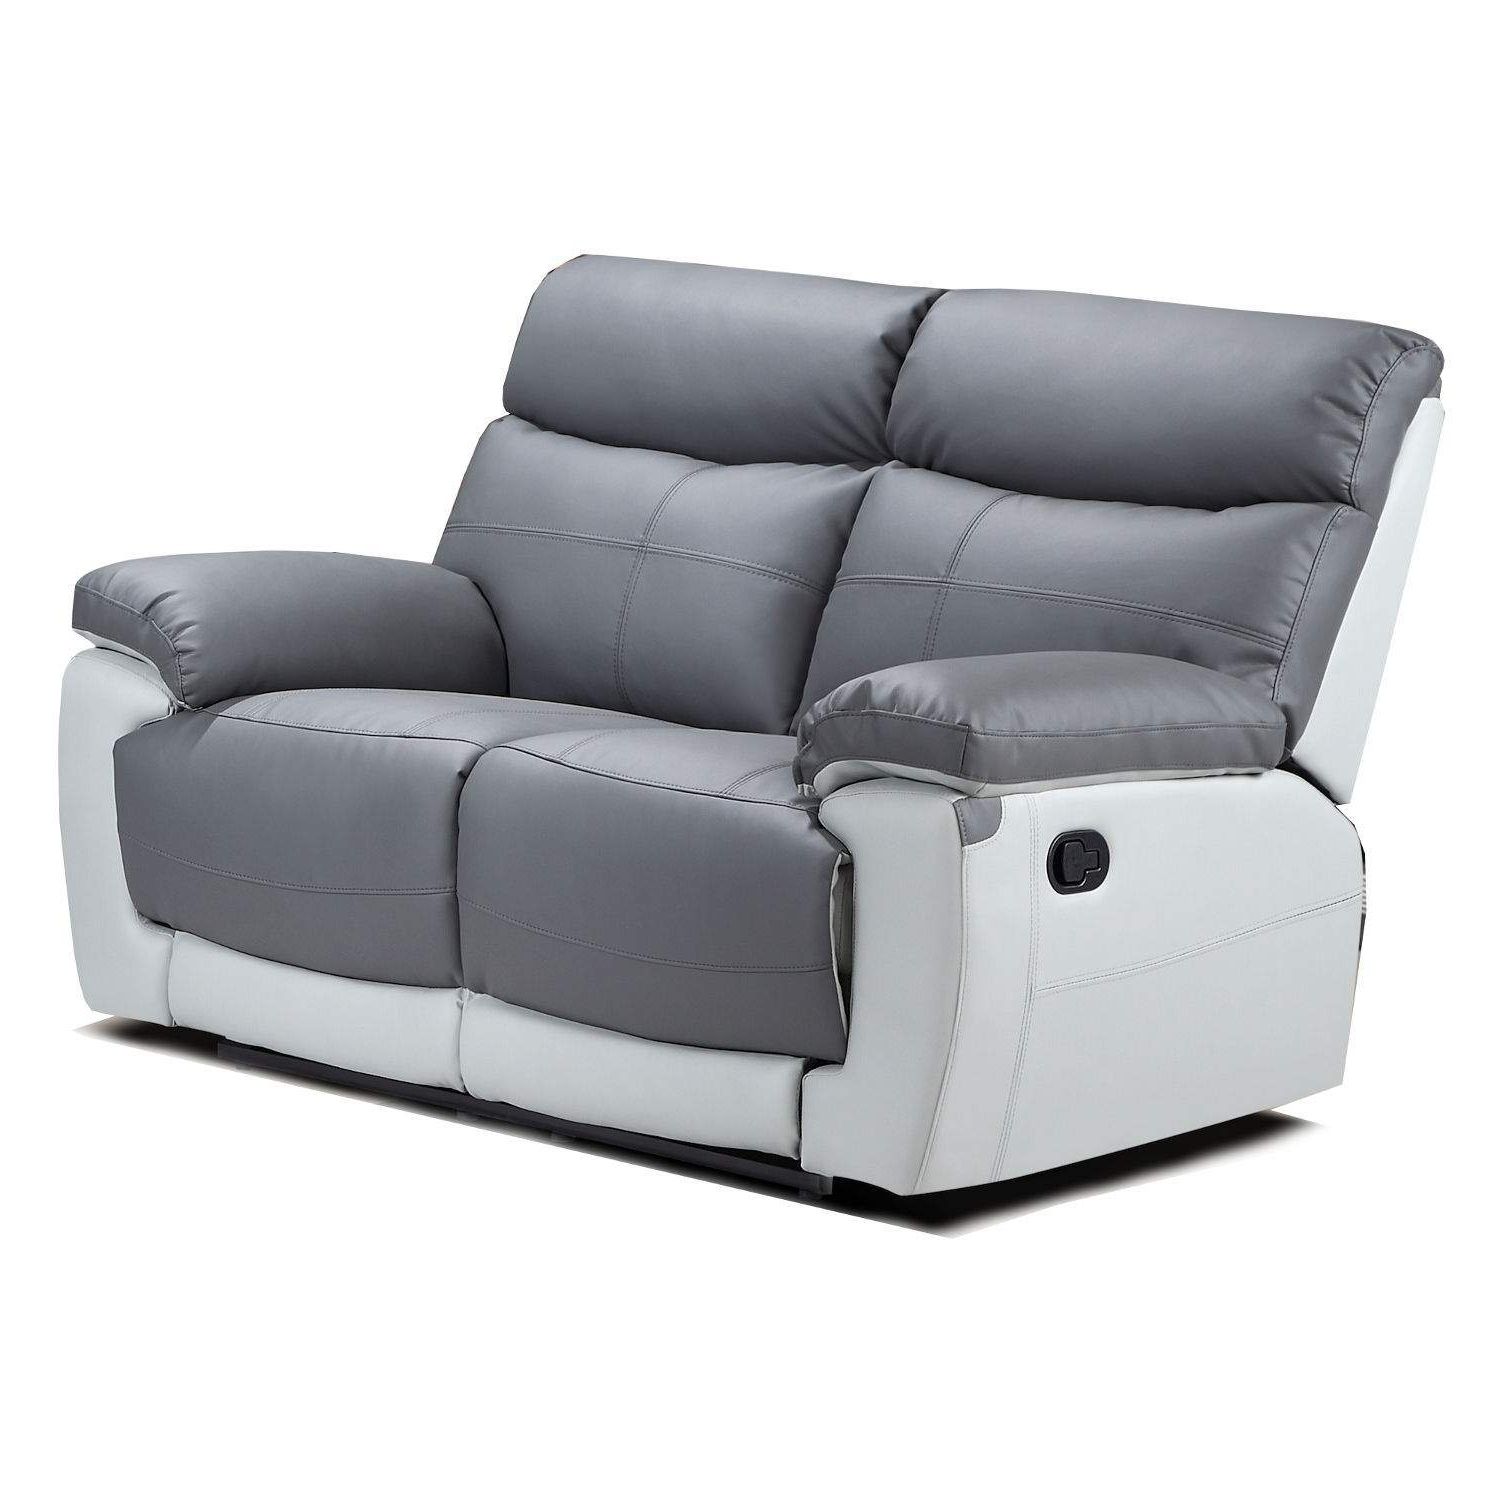 2 Seater Recliner Leather Sofas Pertaining To Well Liked Duo Lexi 2 Seater Leather Recliner Sofa – Next Day Delivery Duo (View 2 of 20)